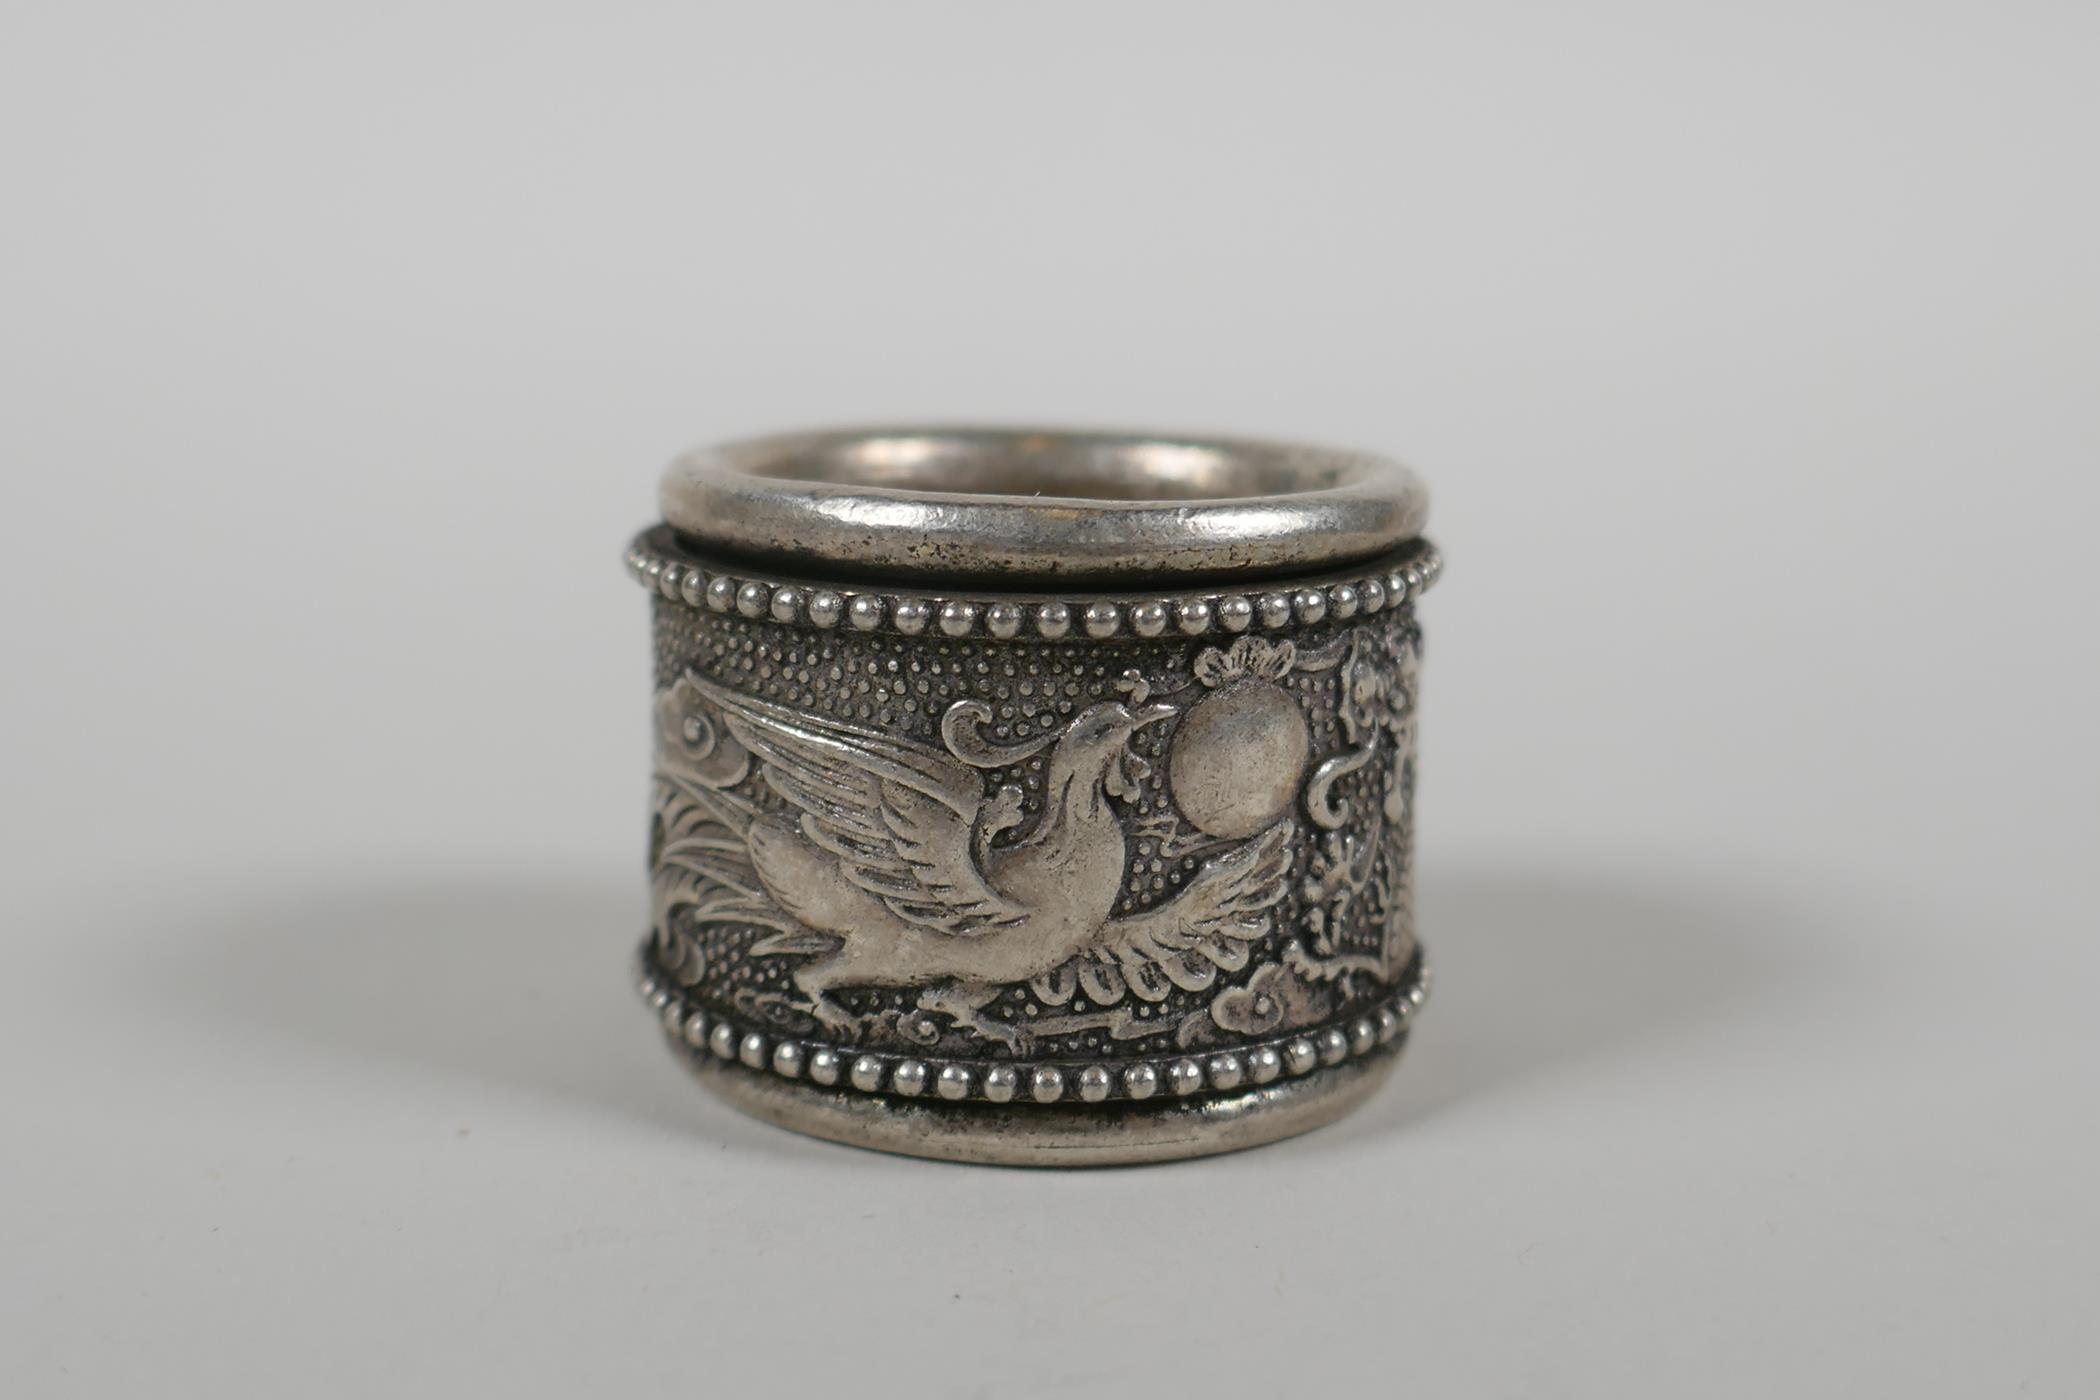 A Chinese white metal archers thumb ring with a revolving cuff decorated with a dragon and